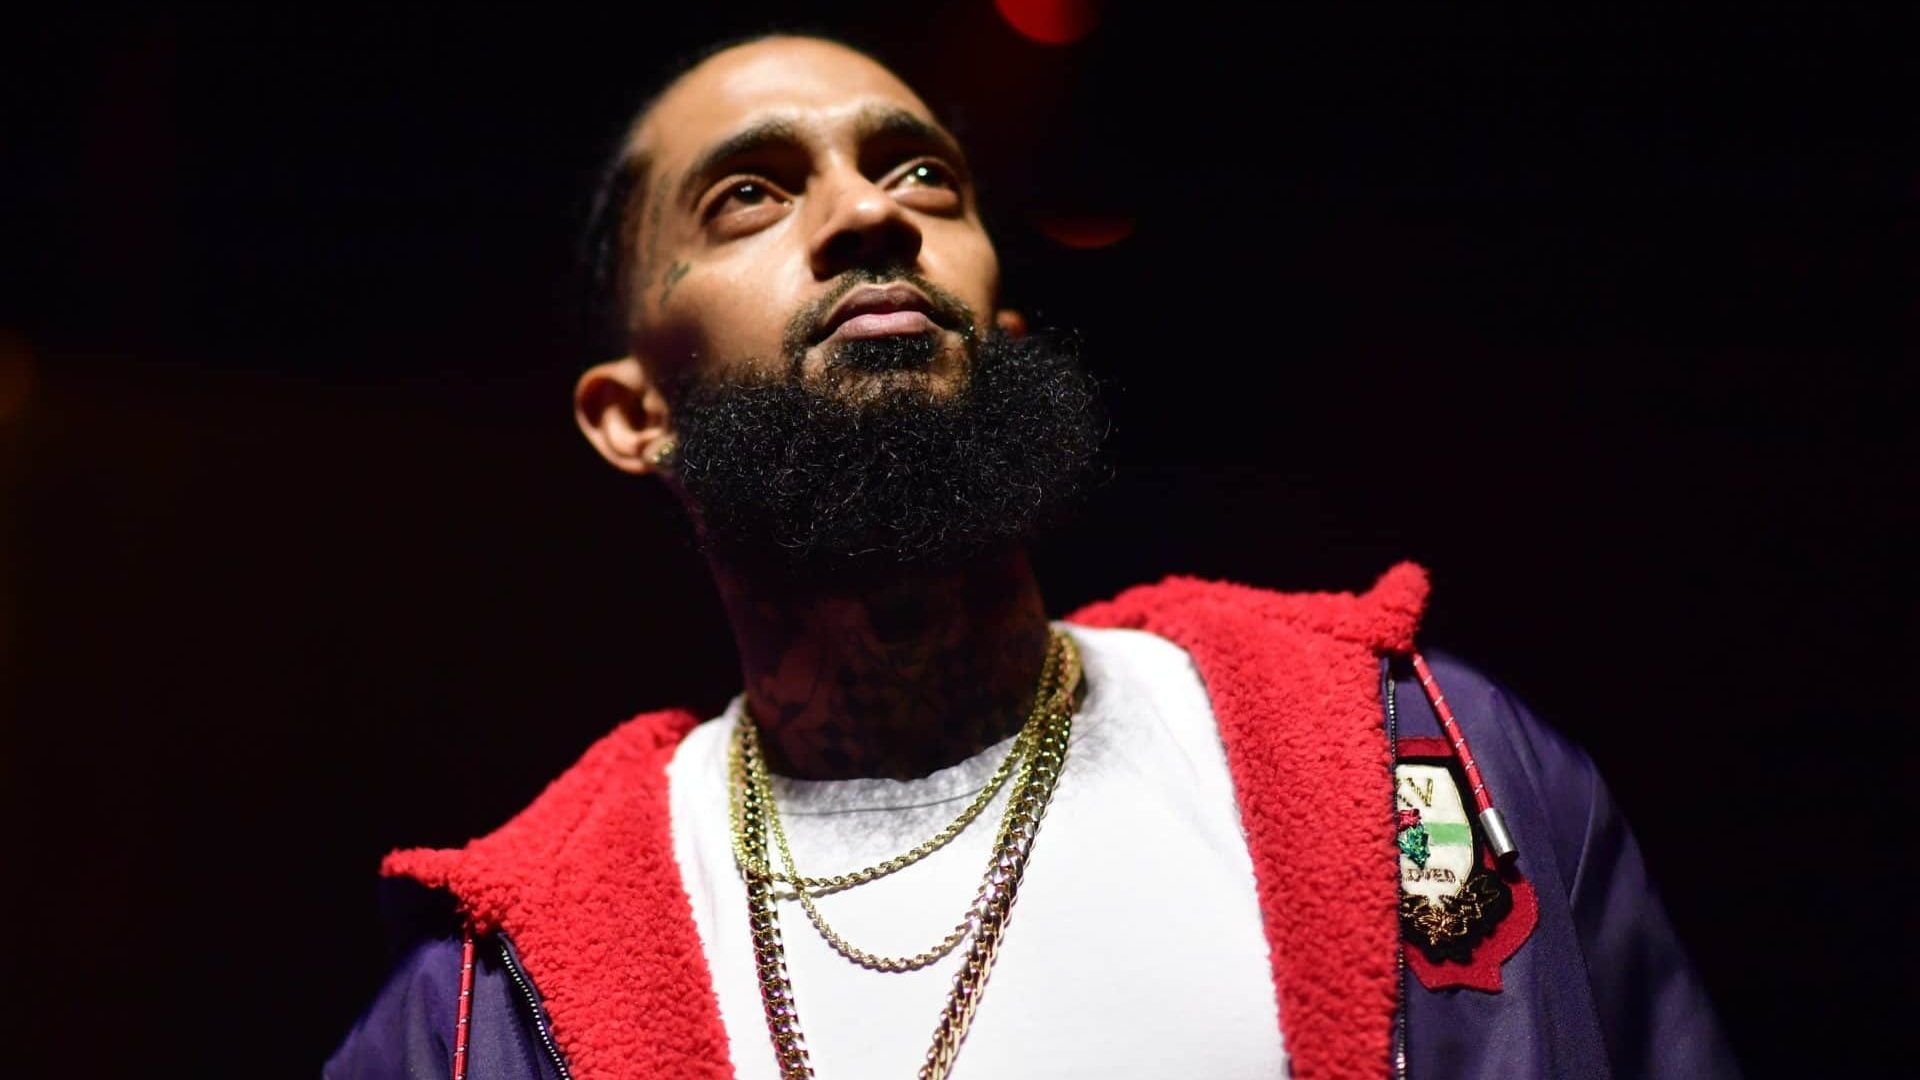 Nipsey Hussle's Murder Suspect Eric Holder Pleads Not Guilty